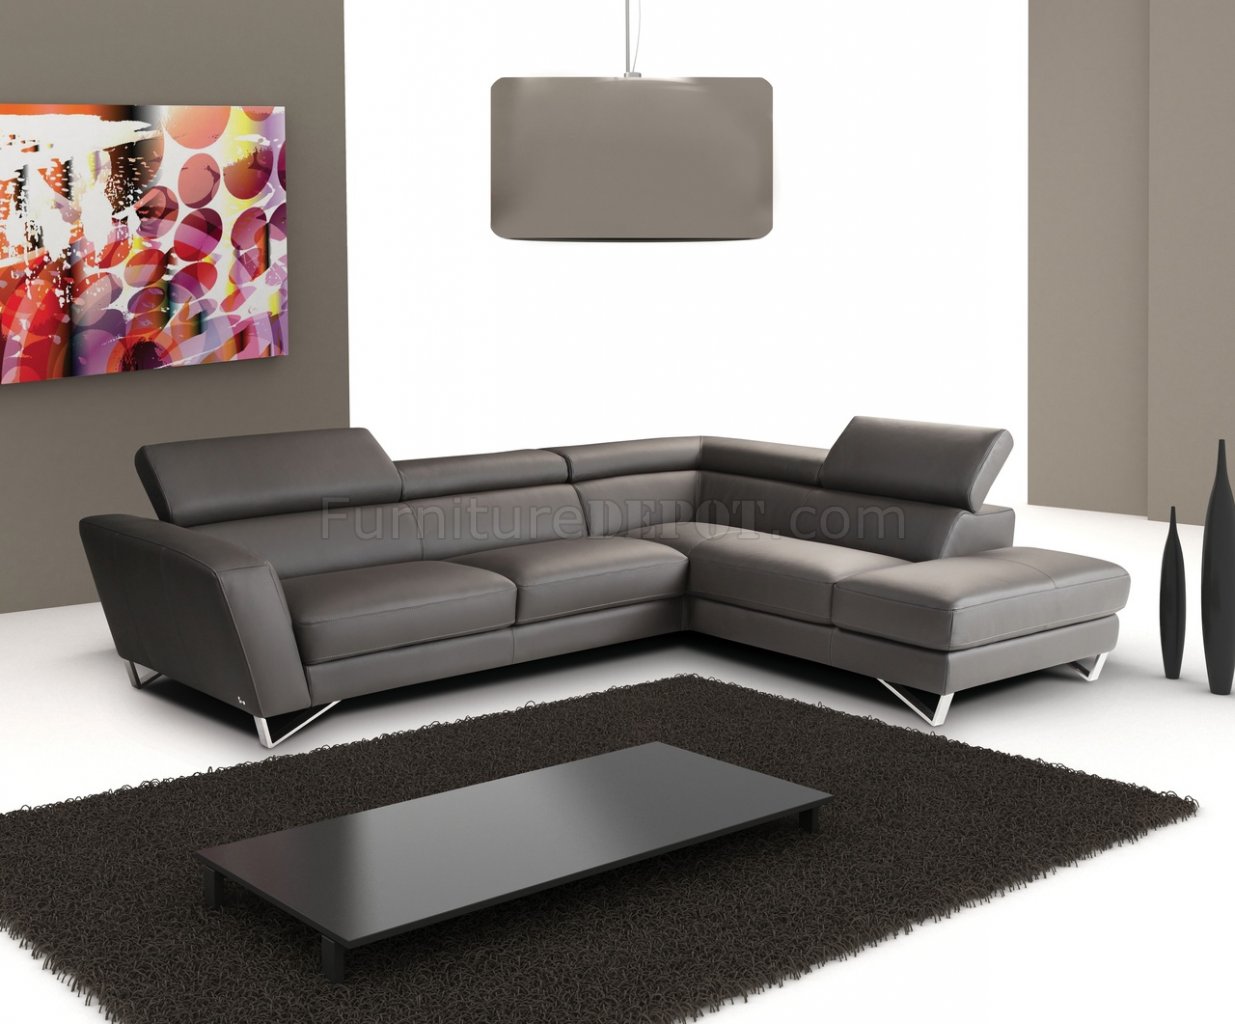 Full Leather Modern Sectional Sofa, Gray Leather Sectional